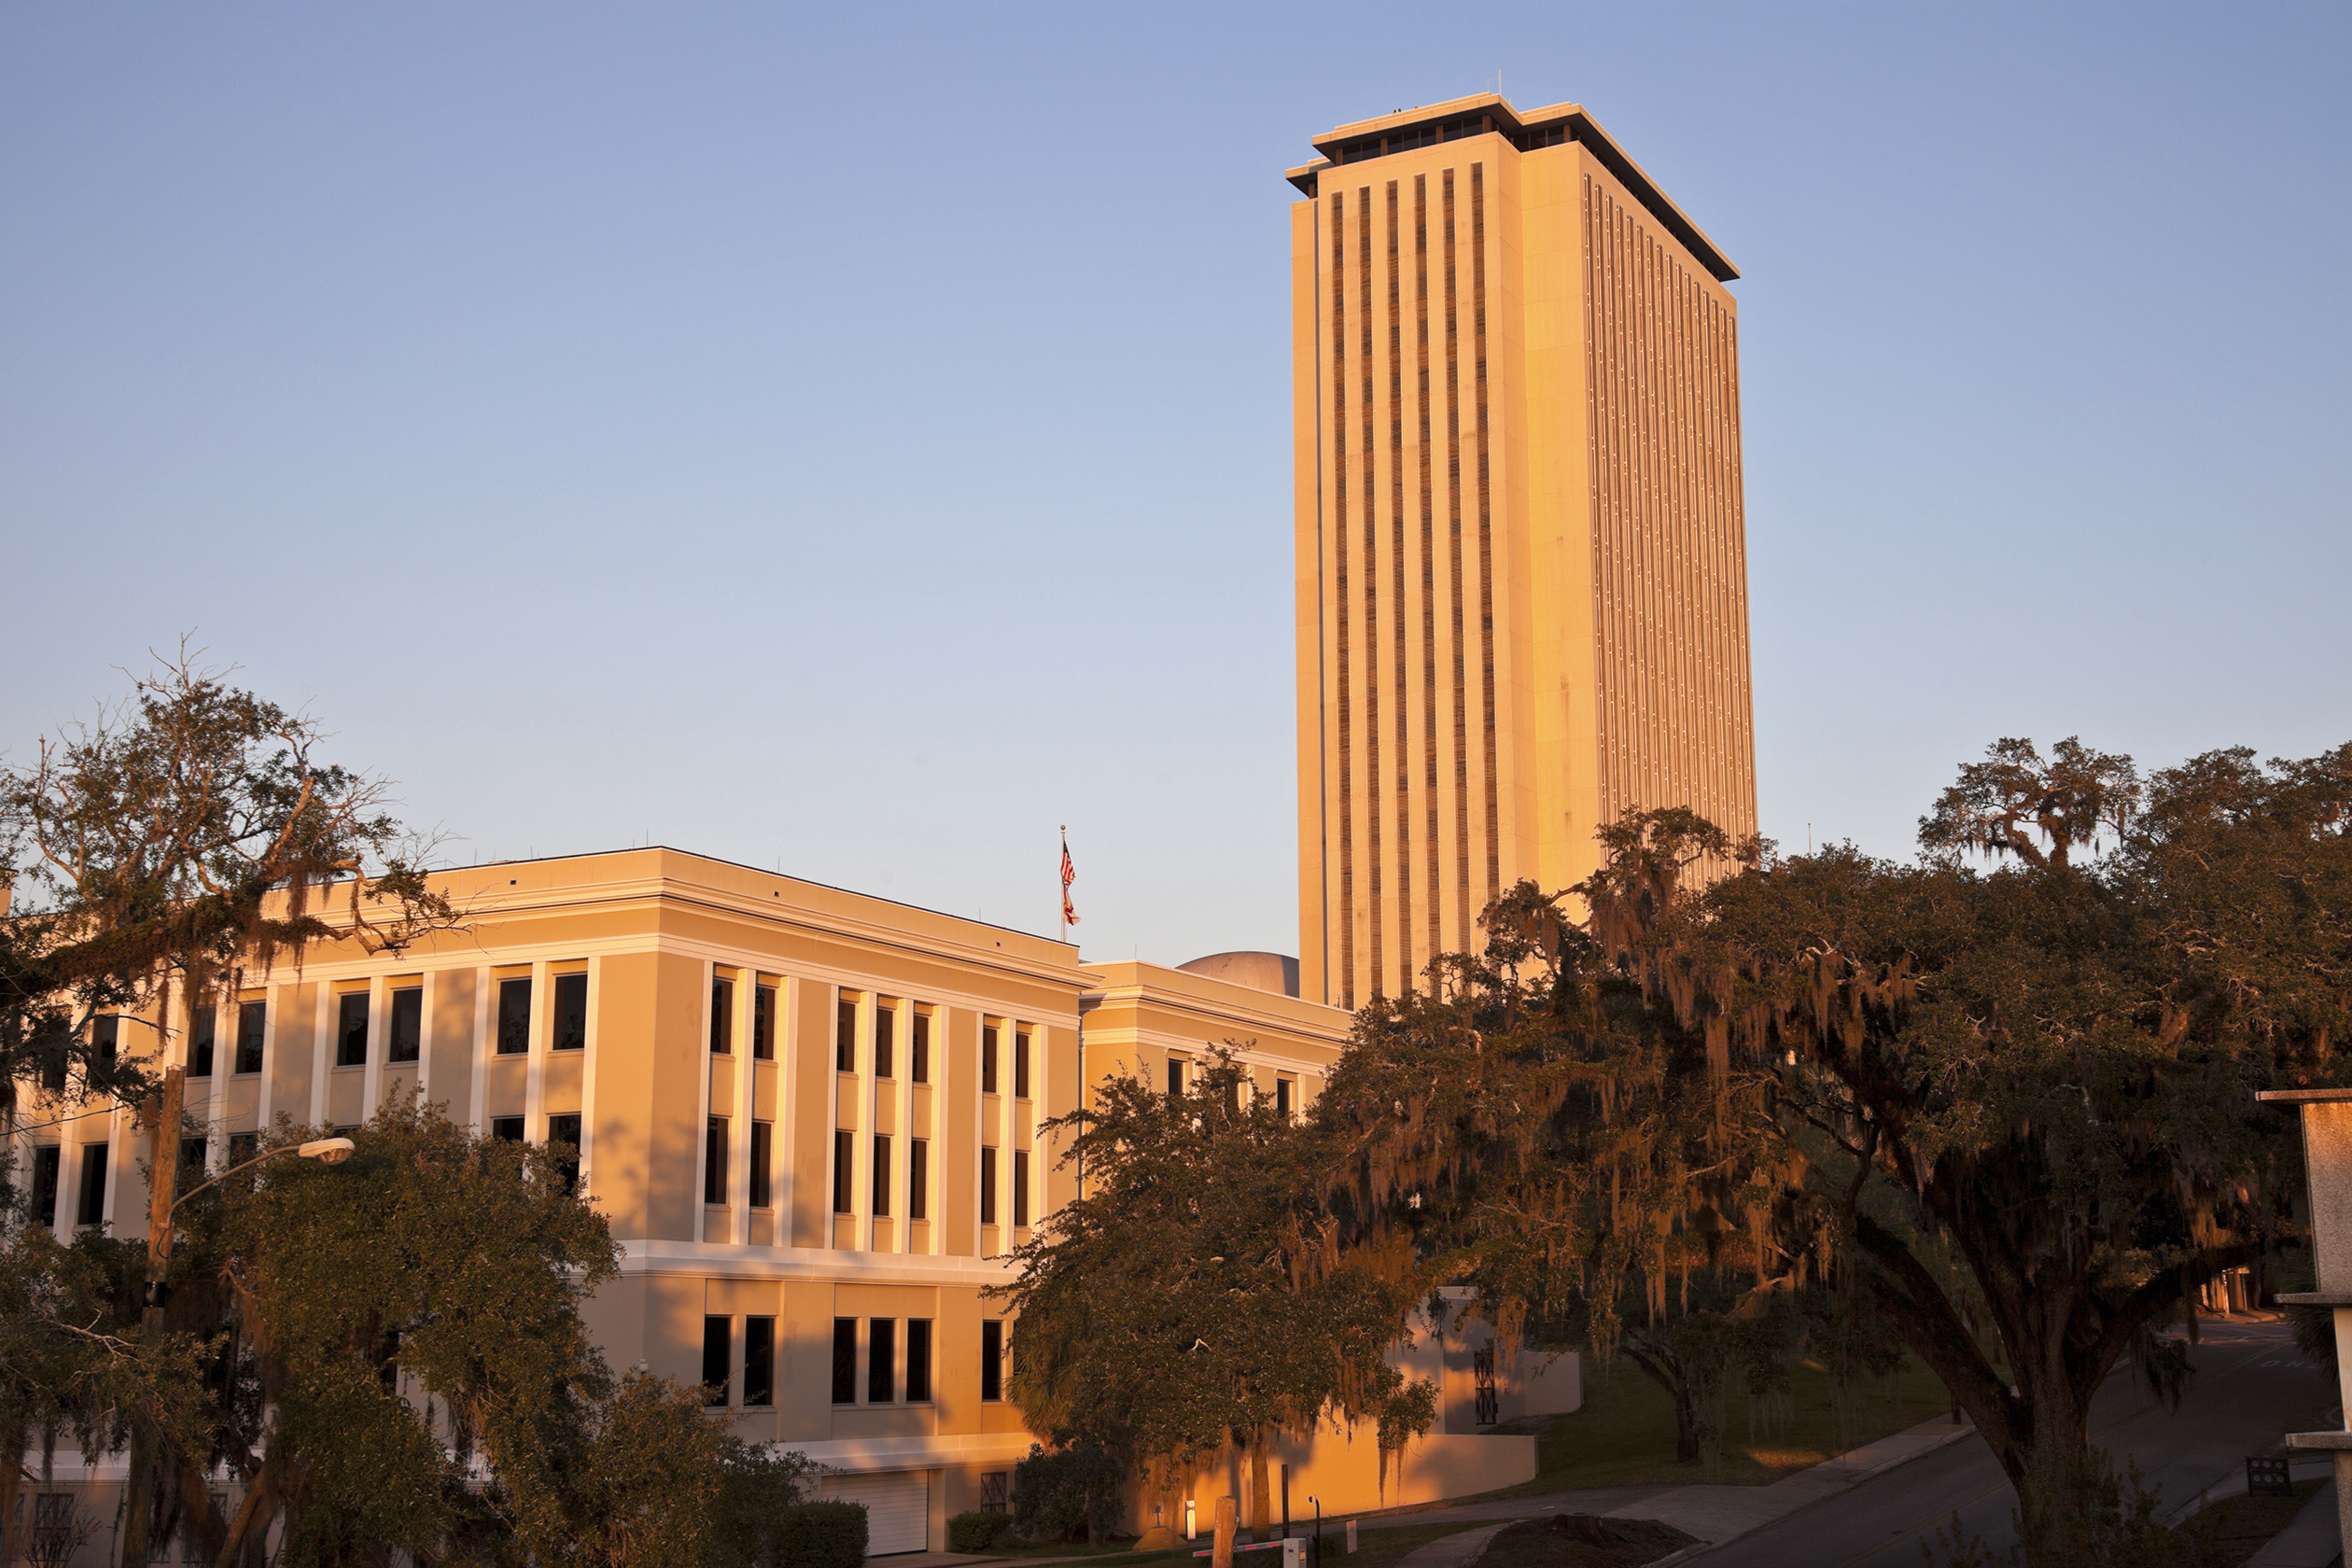 State Capitol Building in Tallahassee